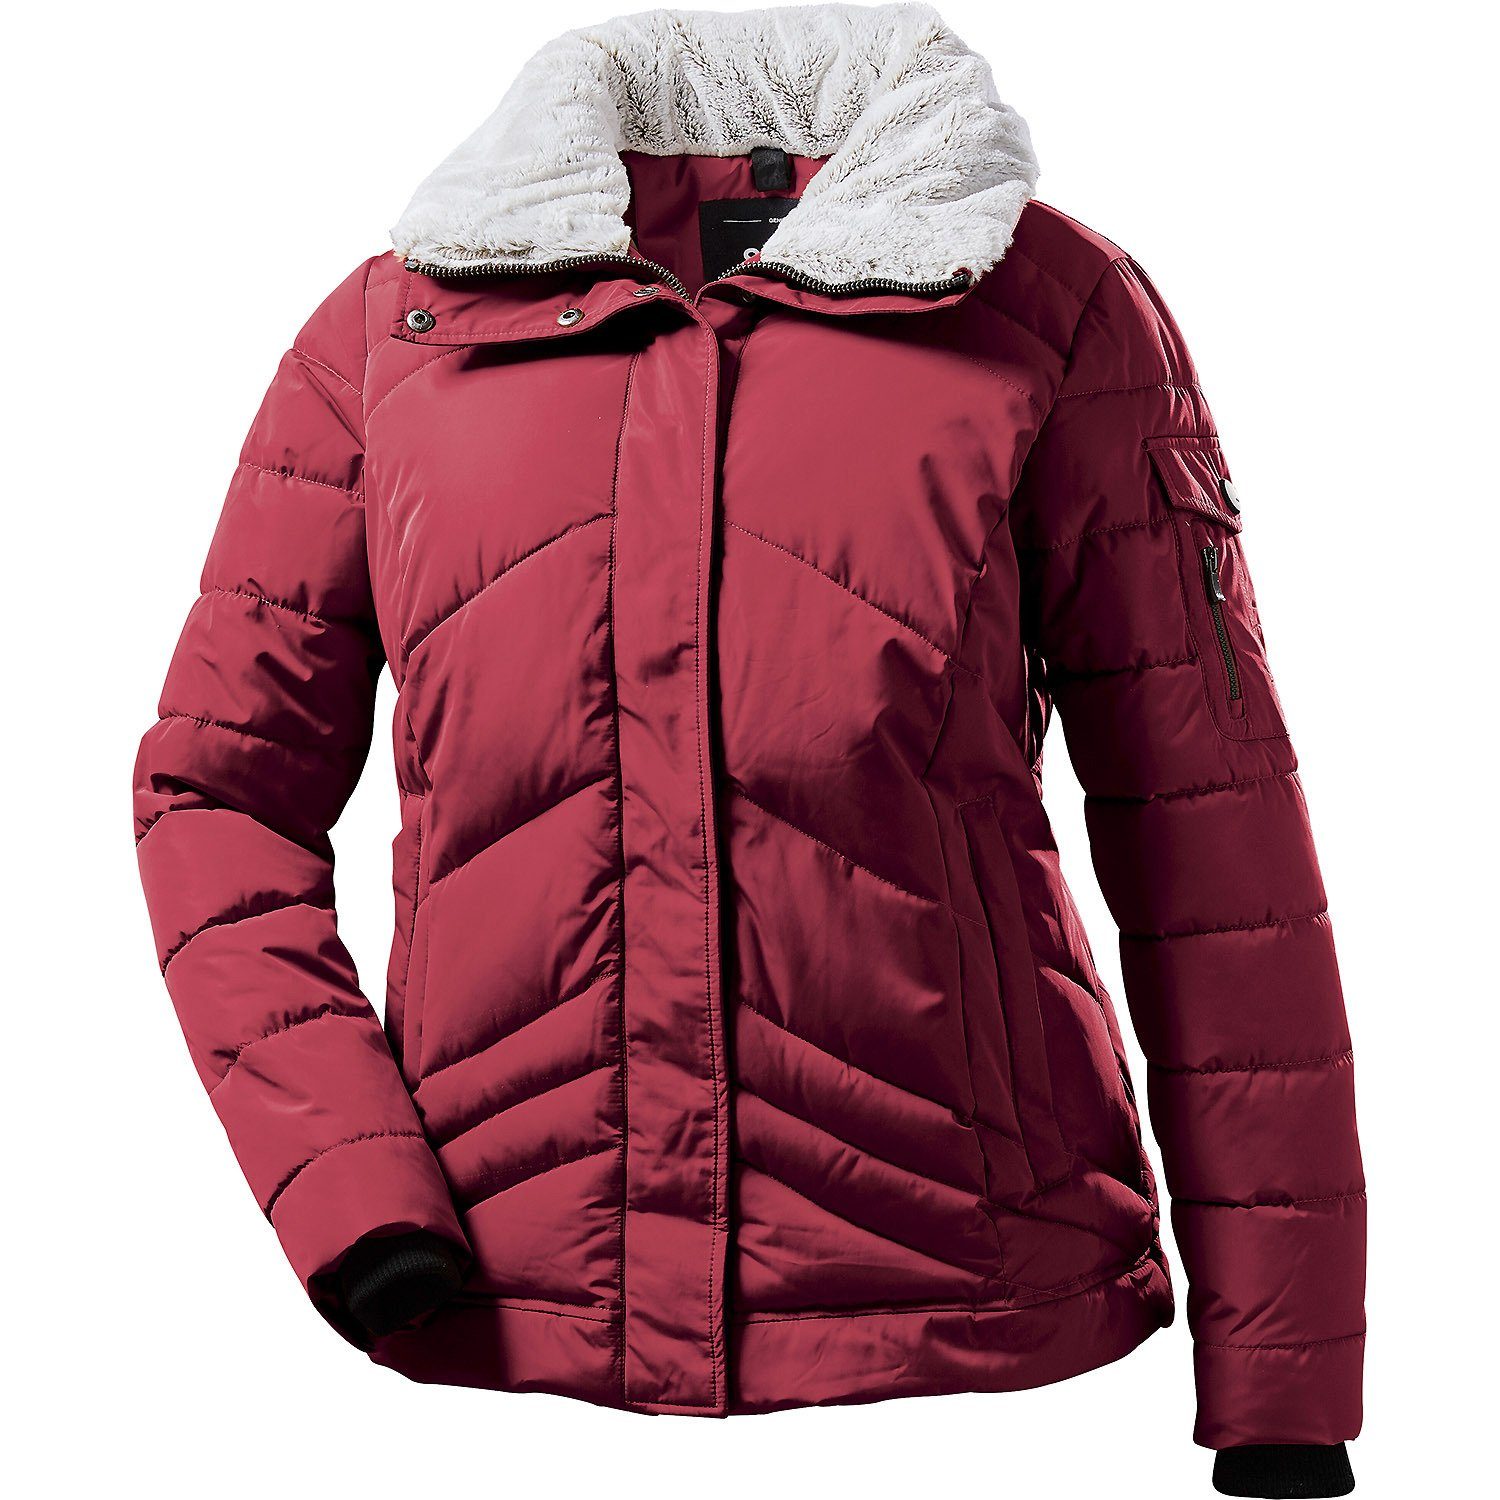 Outdoorjacke Jacke Quilted Dunkelrot A STOY Killtec